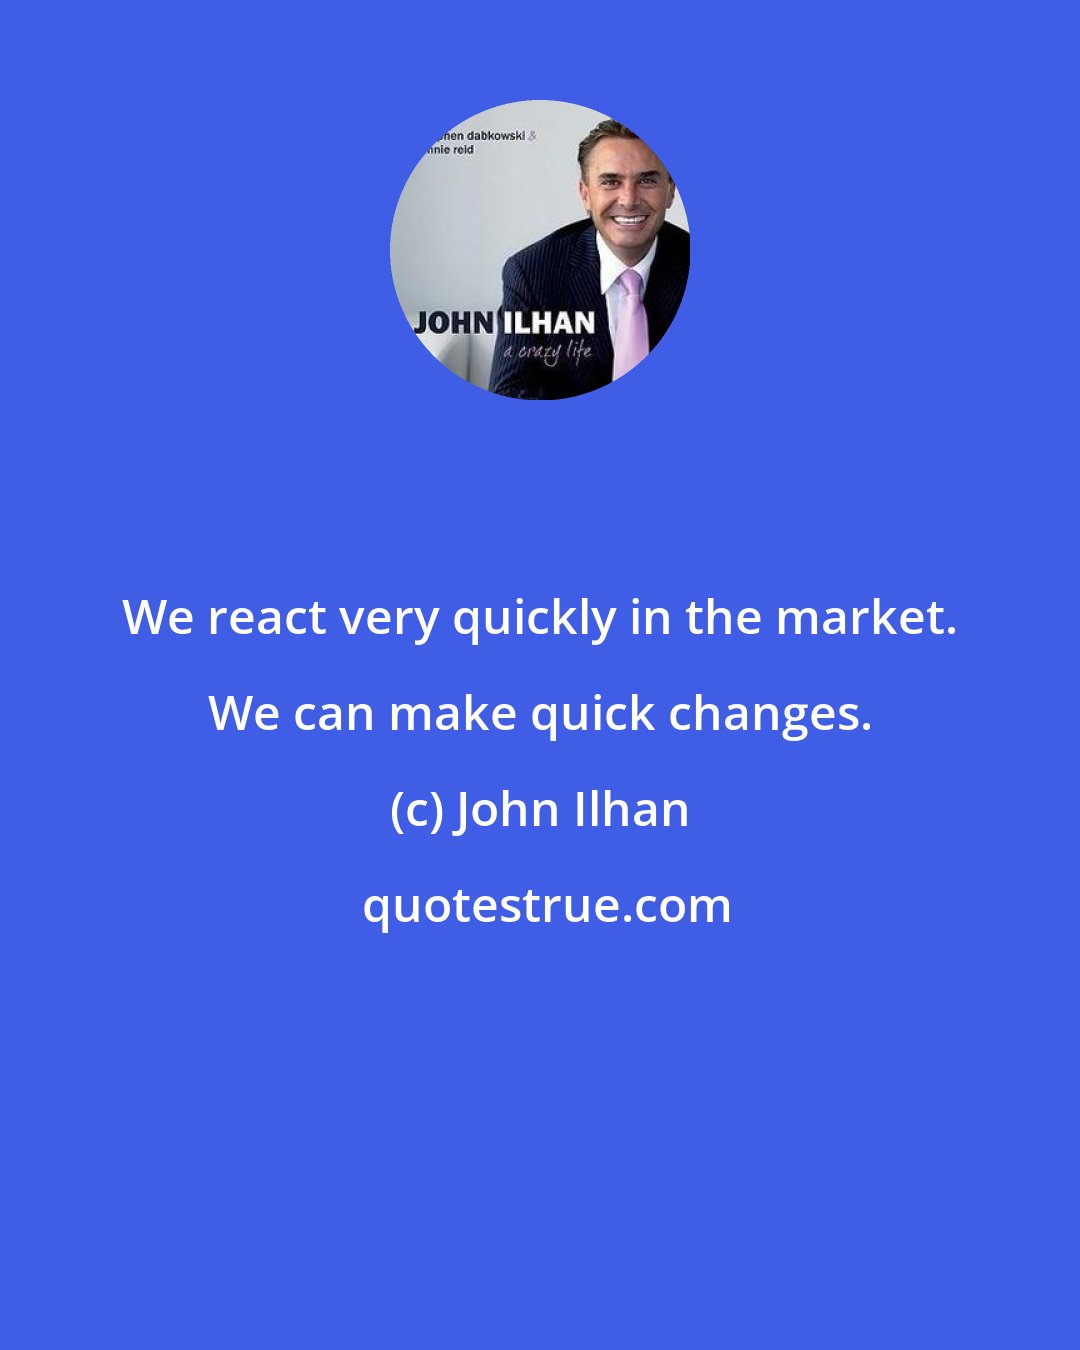 John Ilhan: We react very quickly in the market. We can make quick changes.